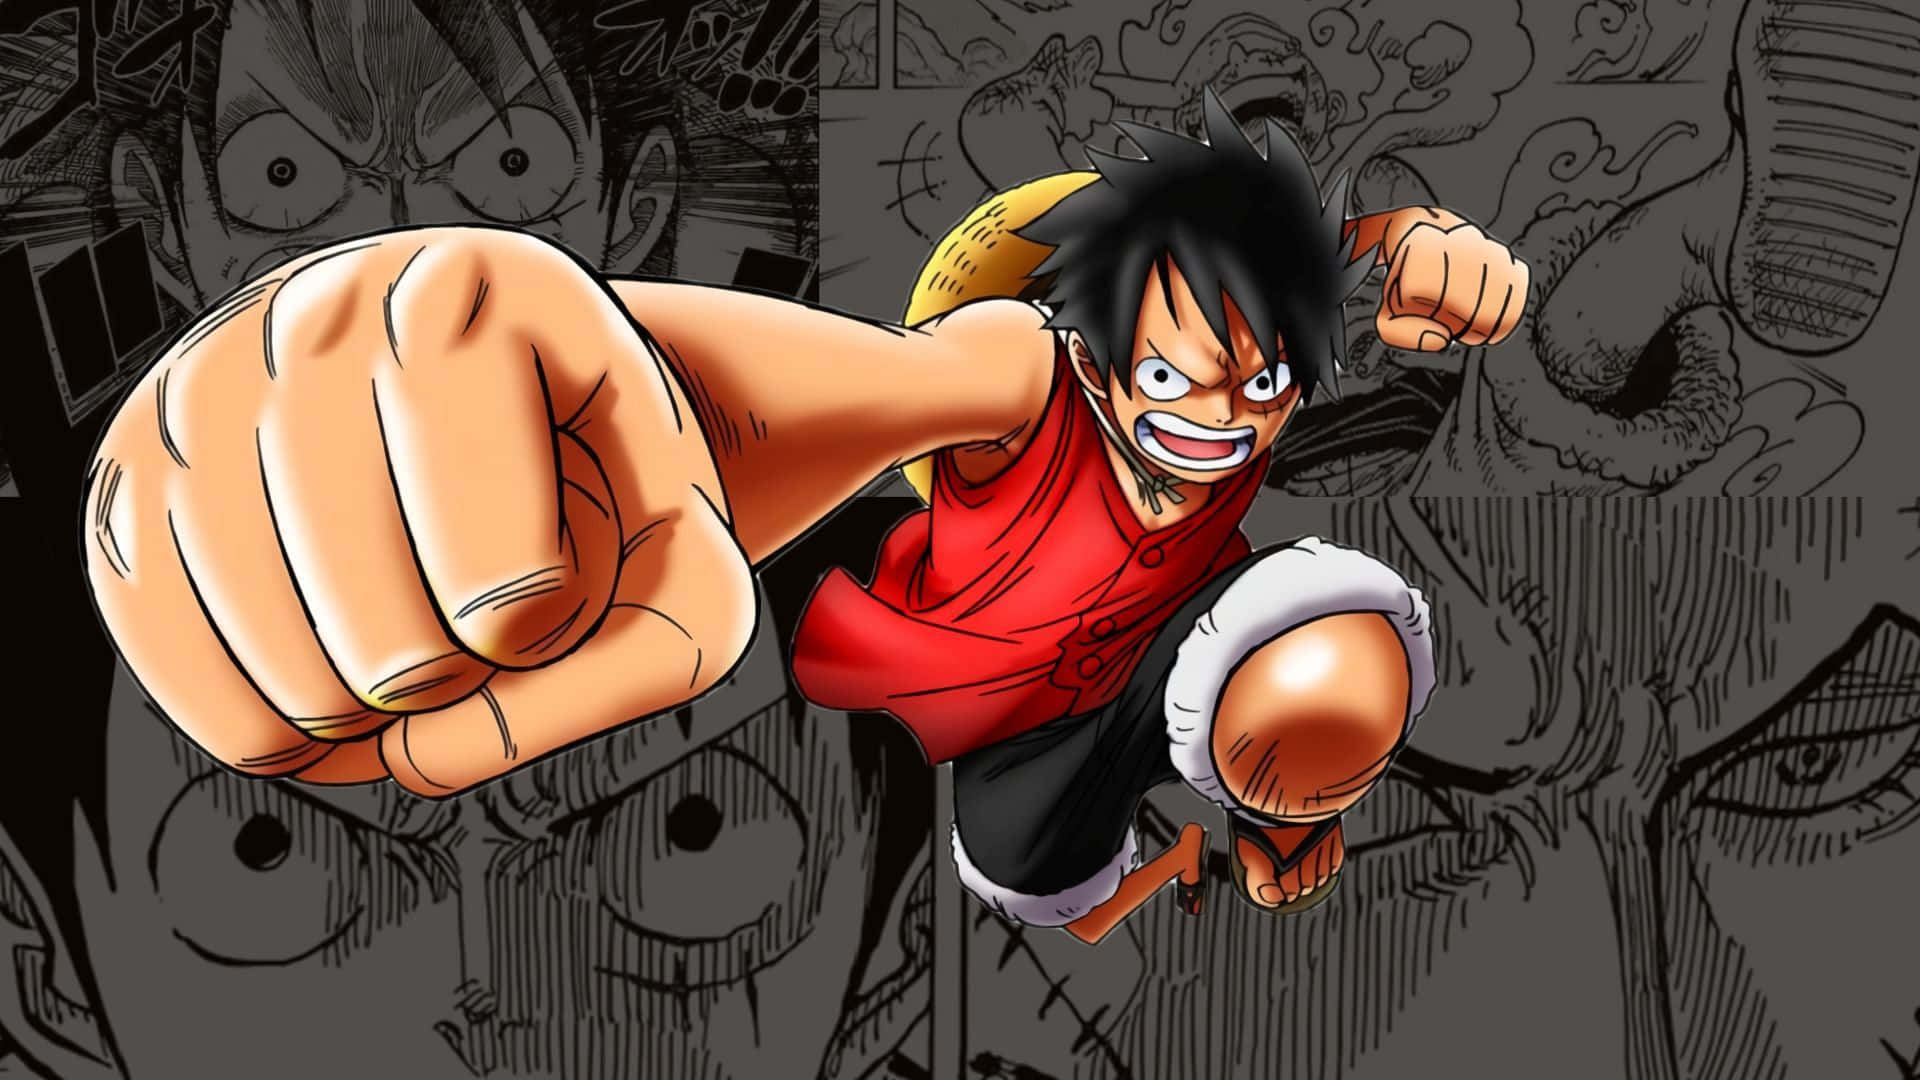 1)  Luffy’s Ready to Conquer the Seven Seas!